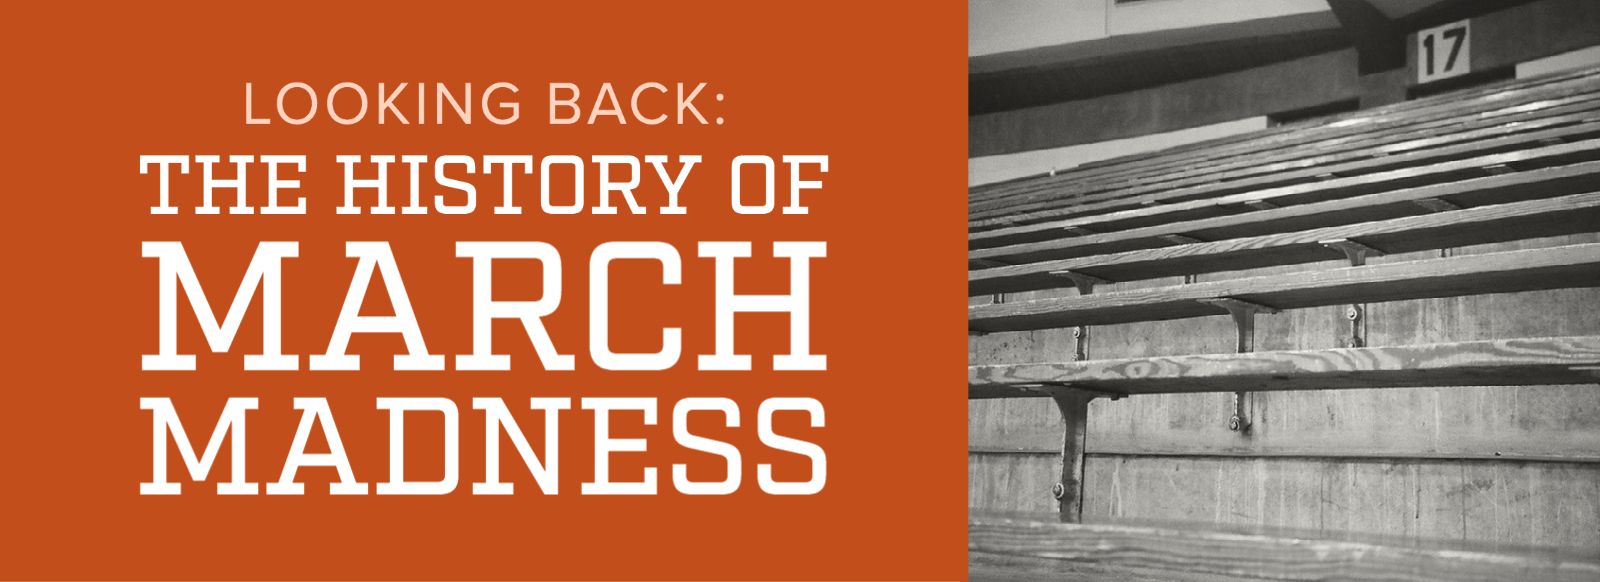 Looking Back: The History of March Madness